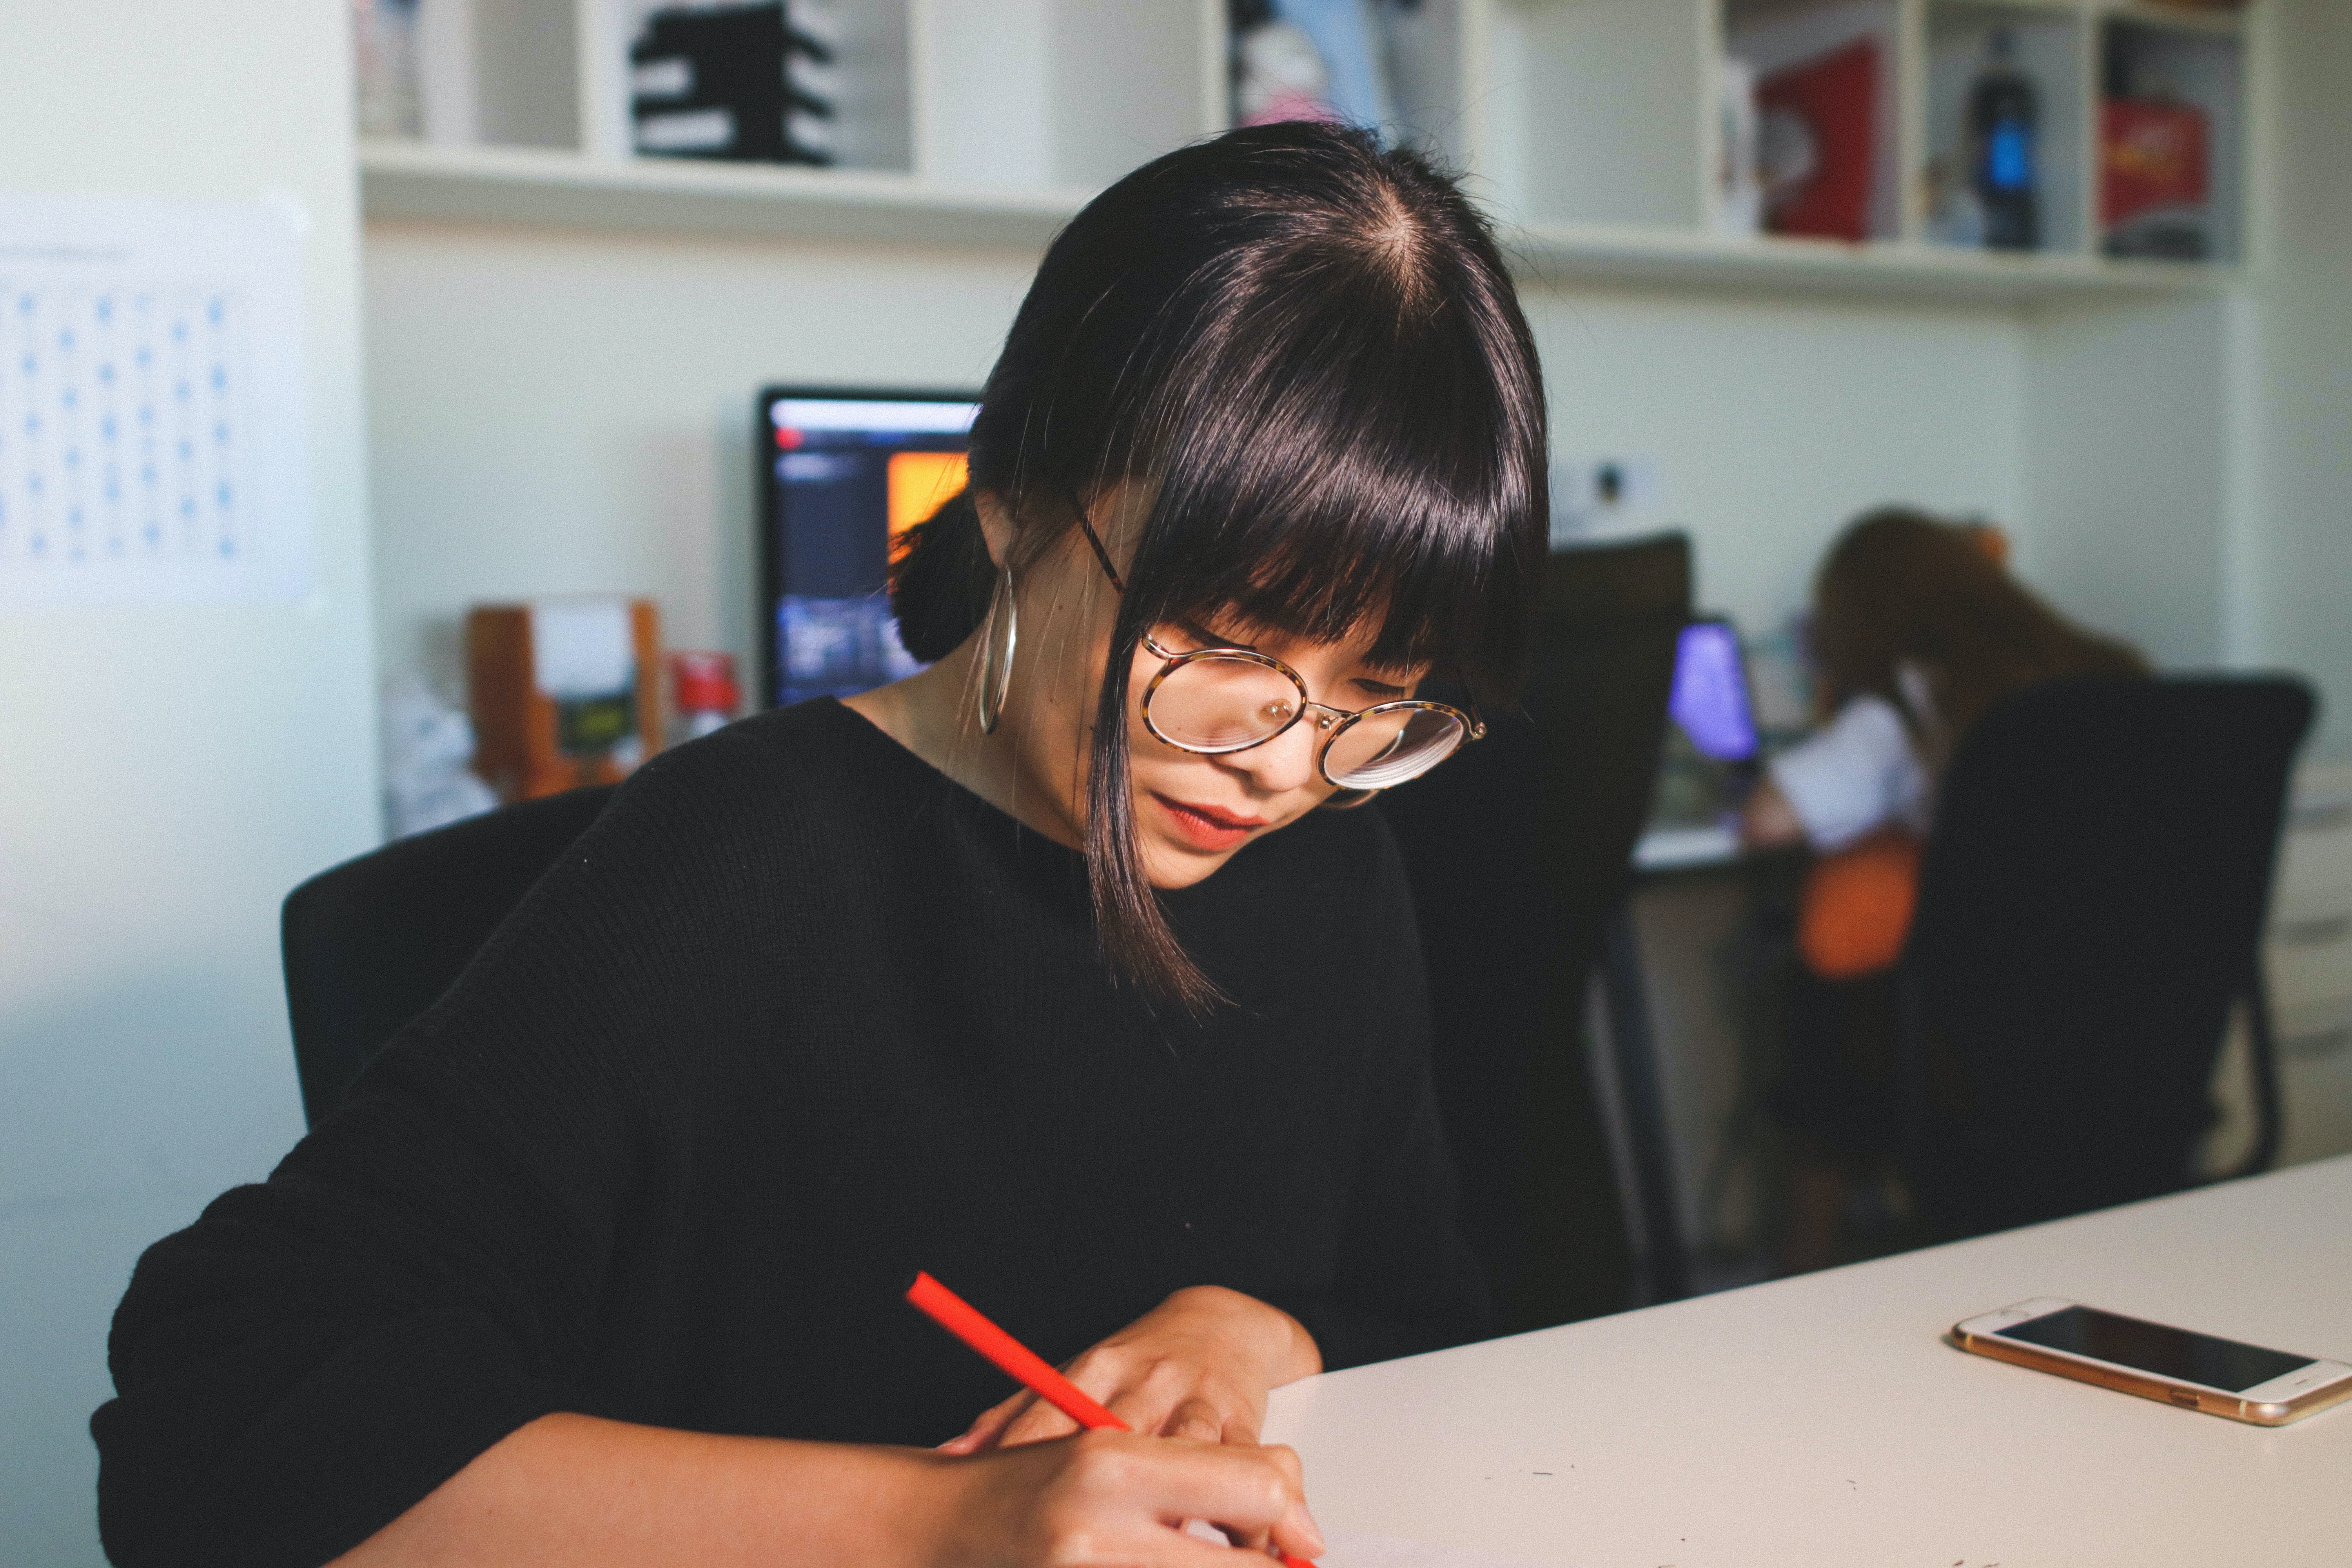 woman with glasses using a red pen to write on paper at a desk